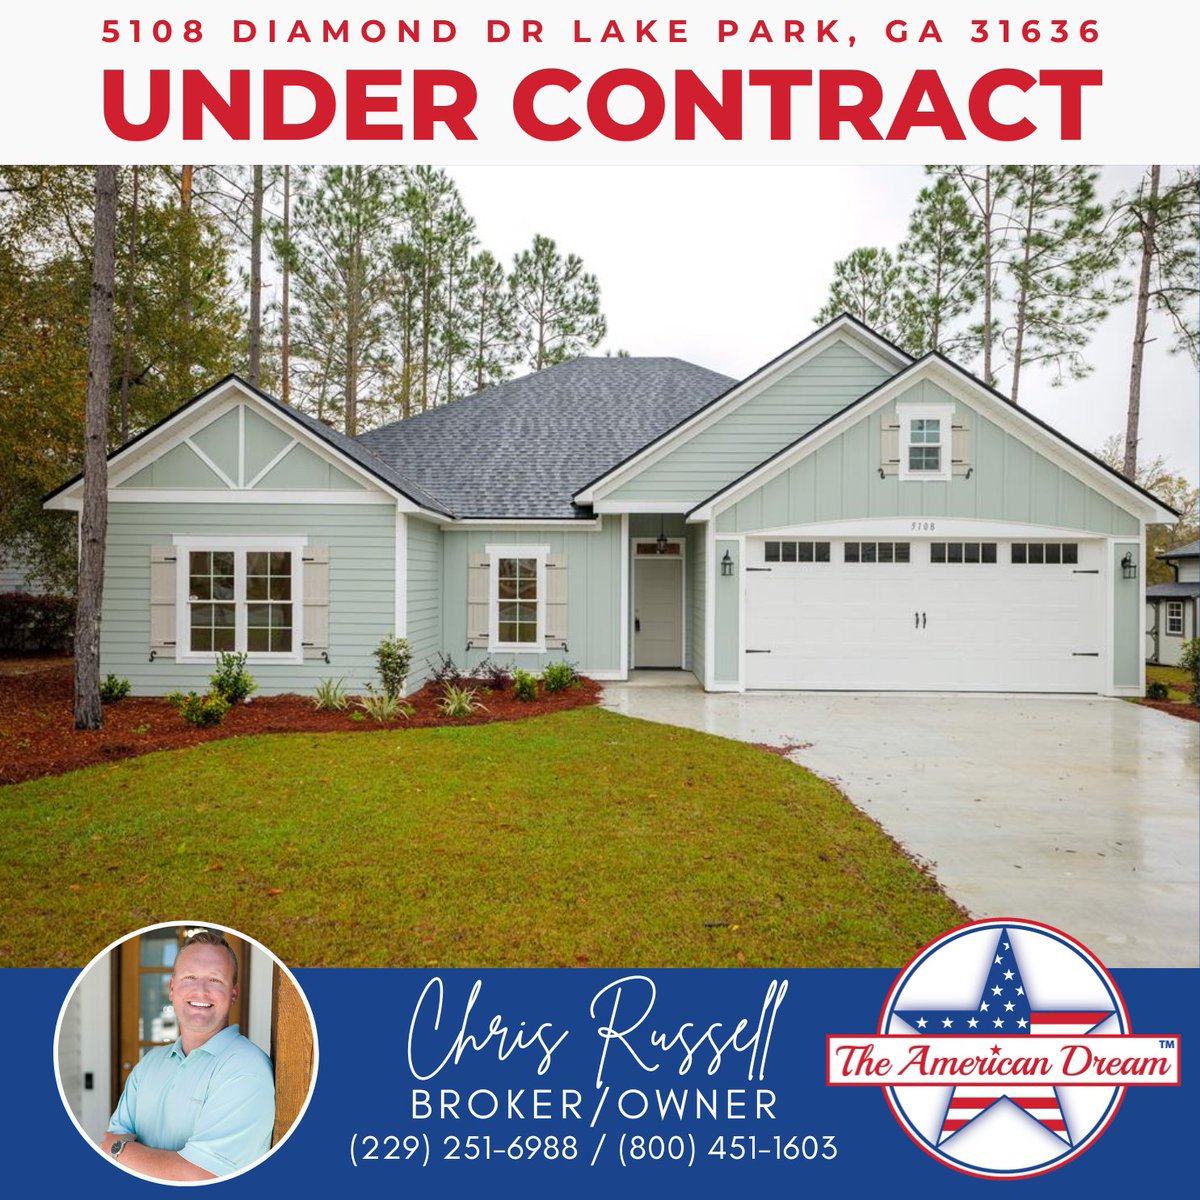 UNDER CONTRACT!🎉

L👀KING to Buy, Sell, Build or Invest in Real Estate?🏡

#TheAmericanDream 🇺🇸 #TheDreamTeam